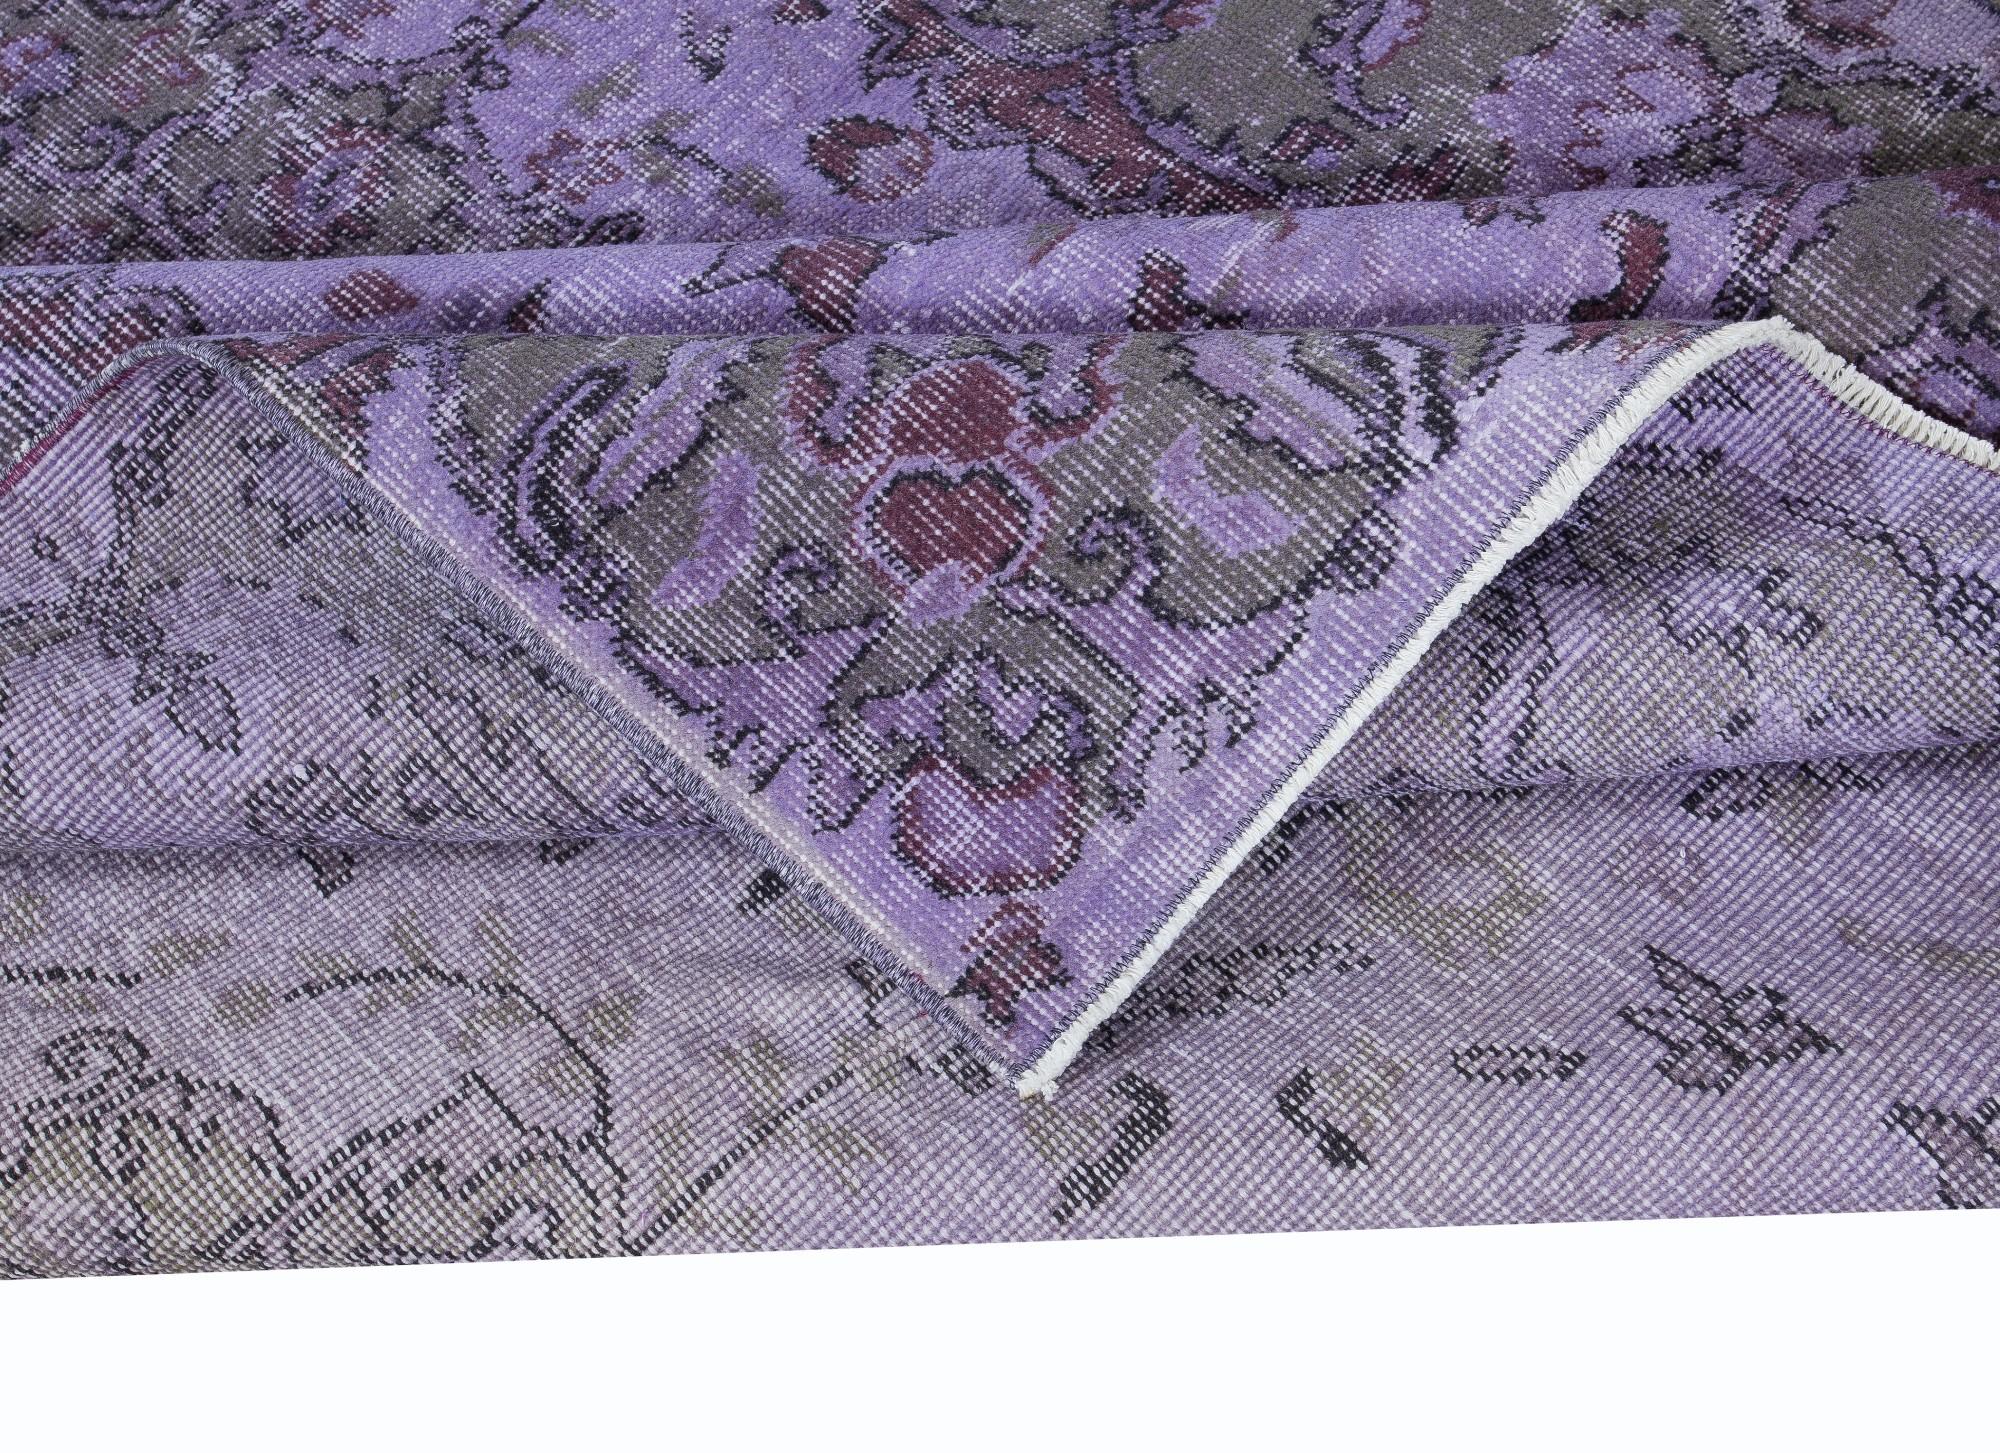 Hand-Knotted 5.3x8.8 Ft Modern Purple Area Rug, Handknotted and Handwoven in Turkey